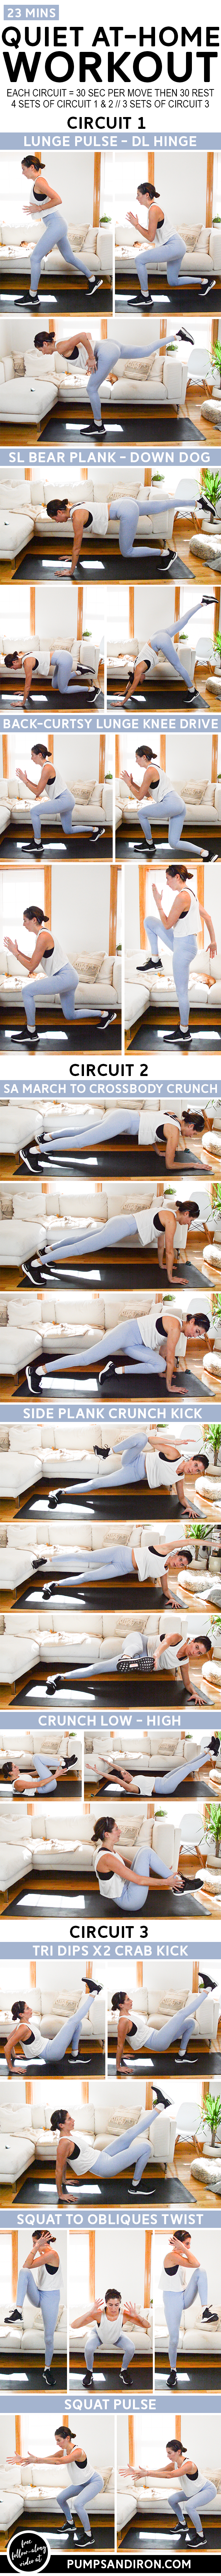 At-Home Quiet Workout - No Equipment - This 23-minute total body workout is perfect for nap time or if you have downstairs neighbors. #quietworkout #workoutathome #athomeworkout #bodyweighttraining